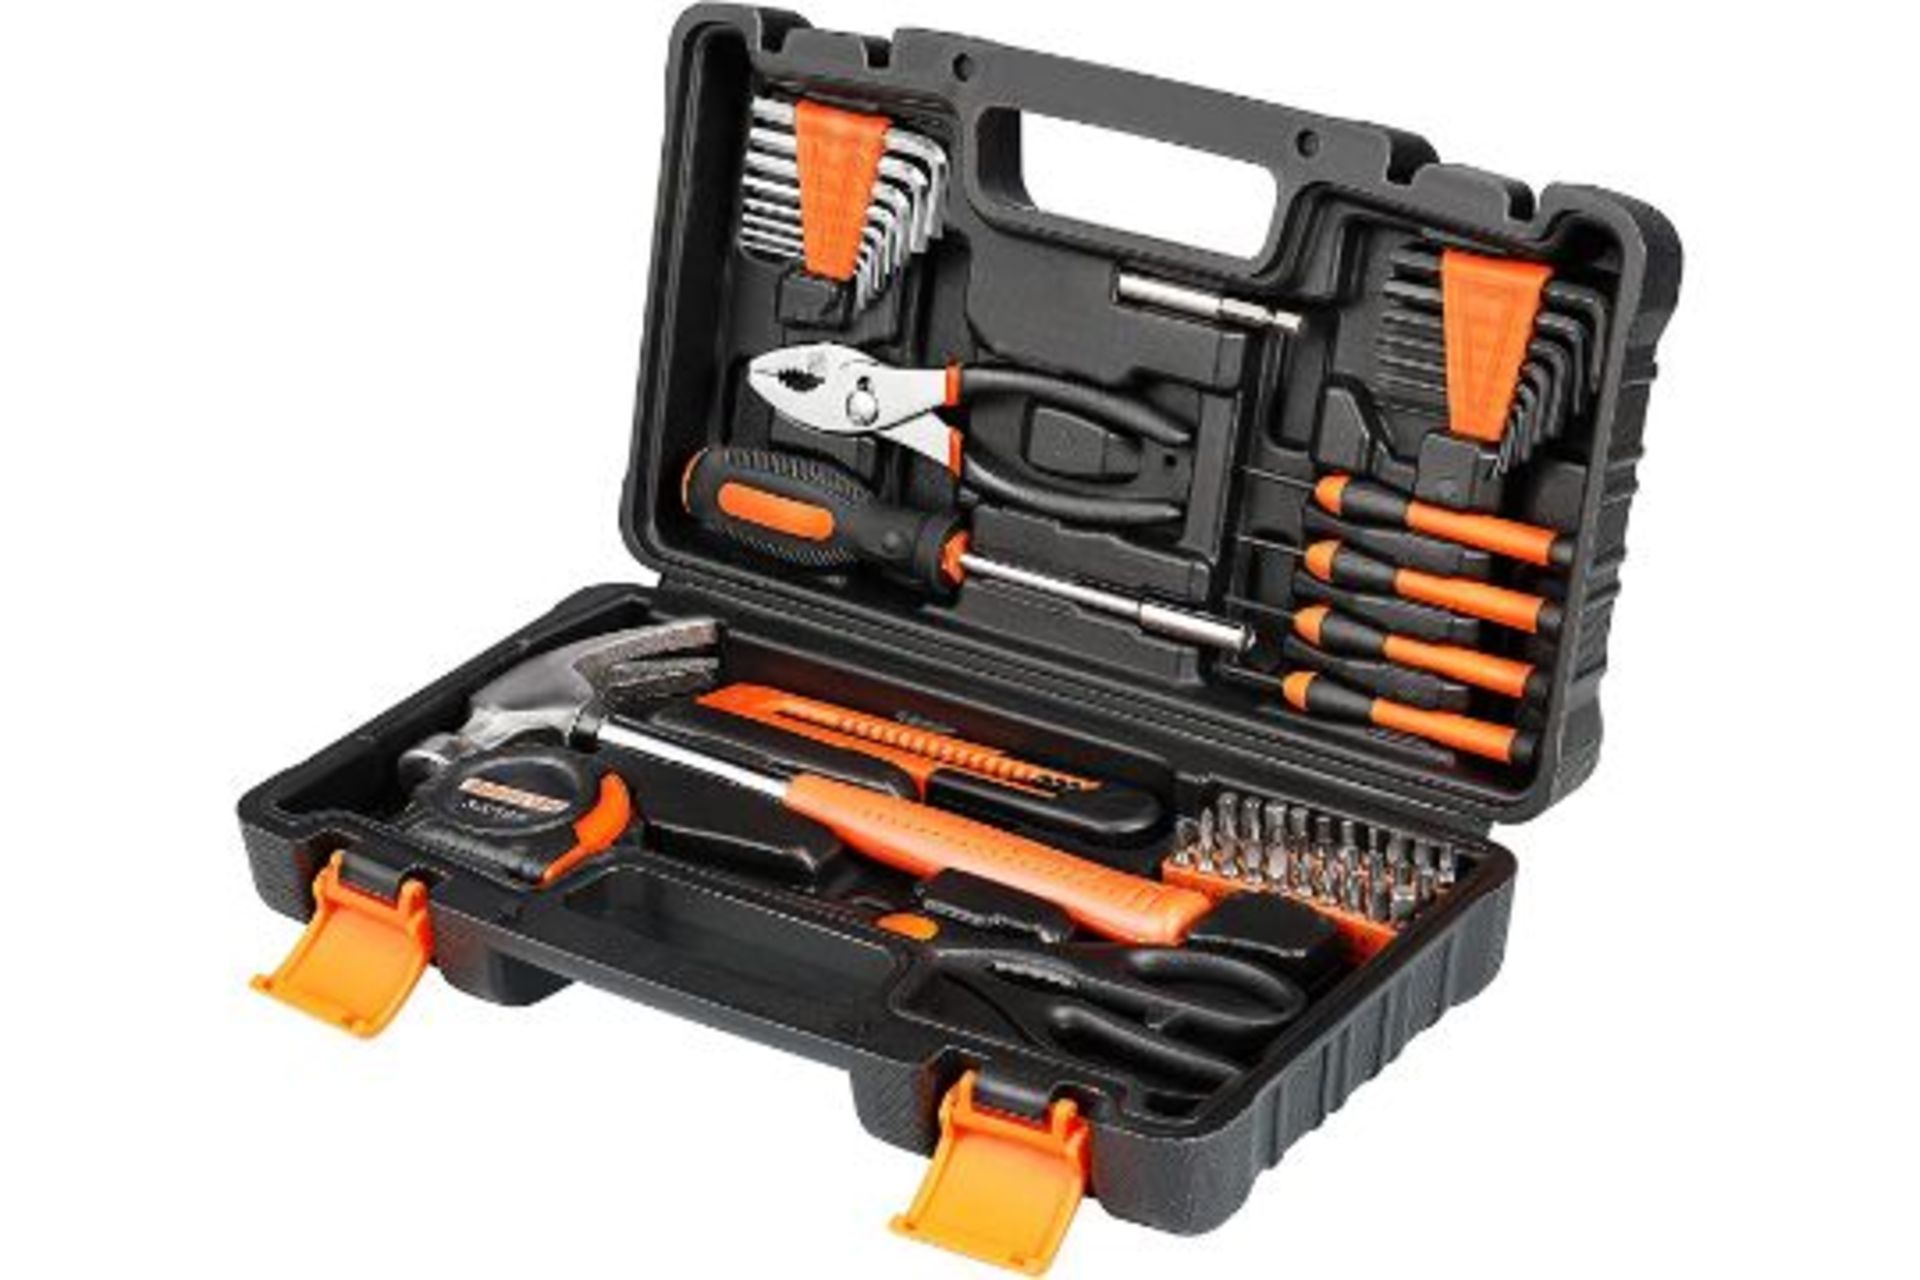 4 X NEW BOXED ENGiNDOT Home Tool Kit, 57-Piece Basic Tool kit with Storage Case. (ROW 10) HANDY